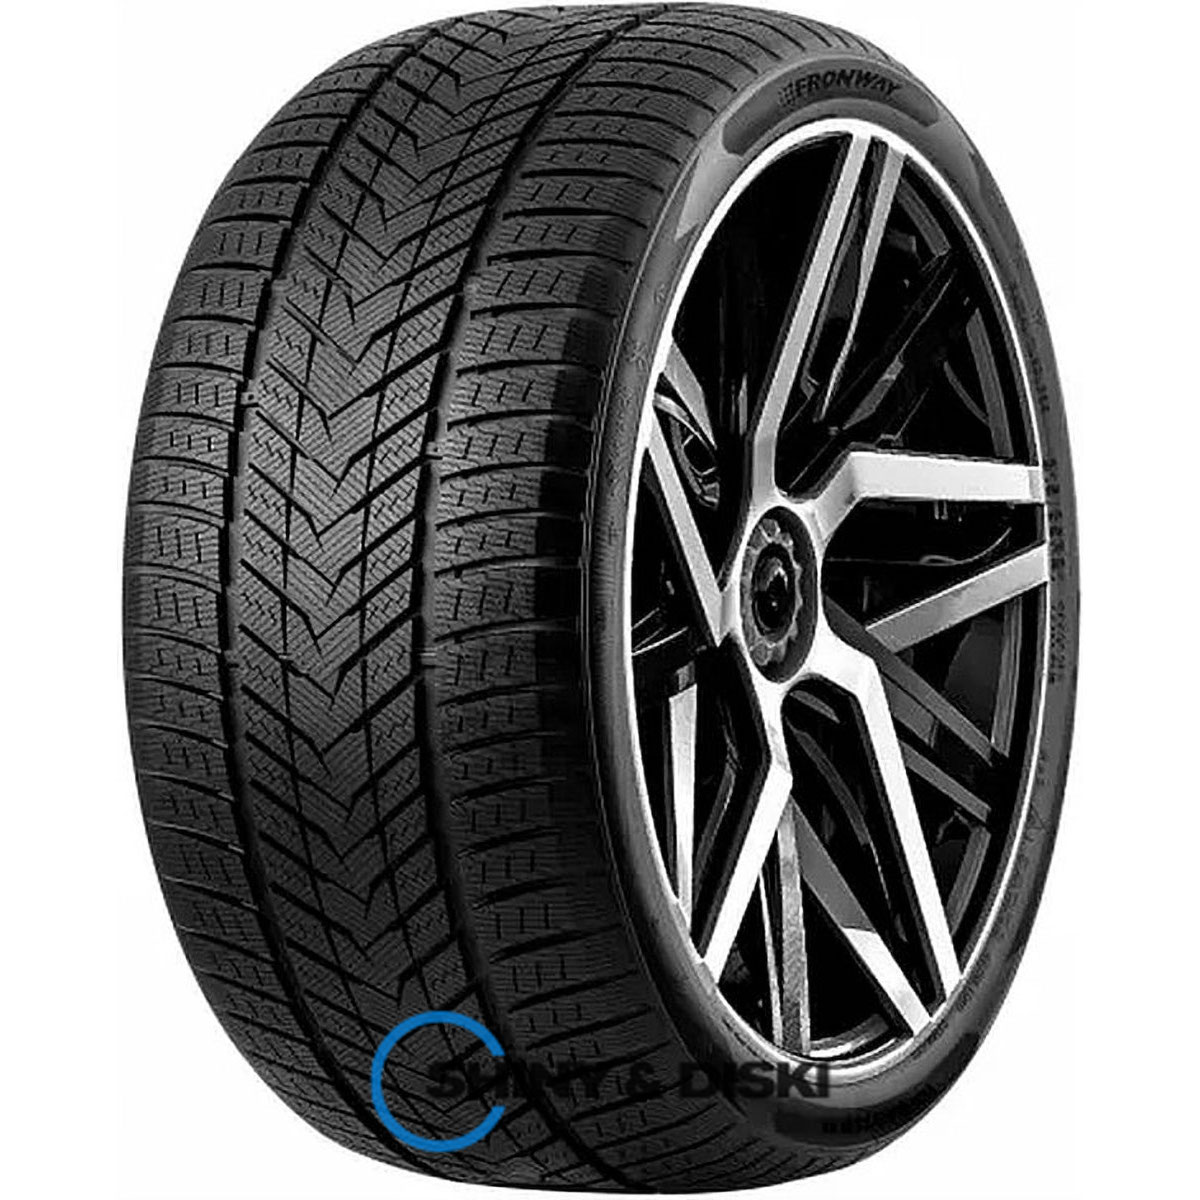 fronway icemaster ii 275/35 r19 100v xl